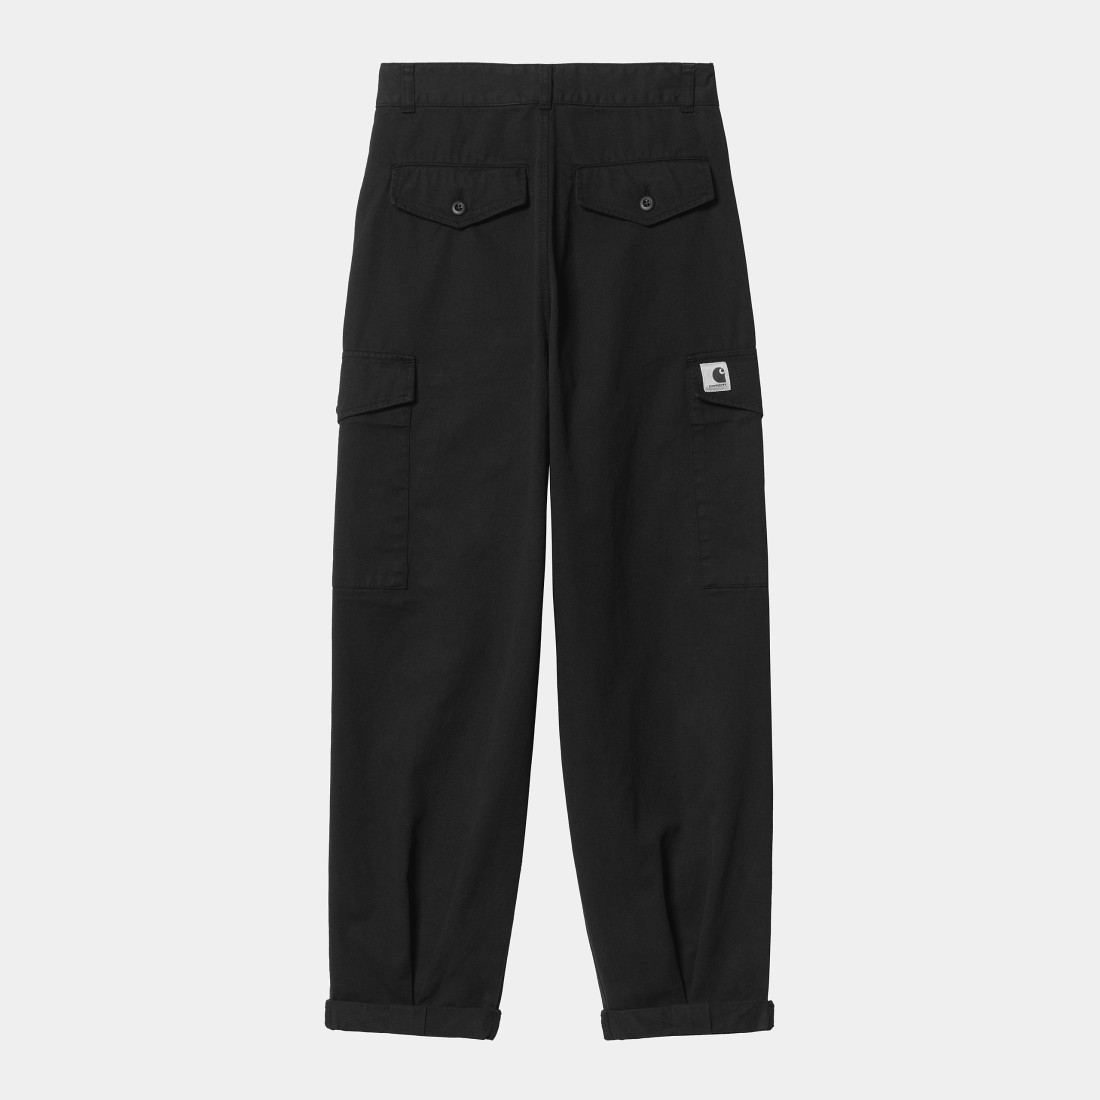 W' Collins Pant Black Garment Dyed Carhartt WIP